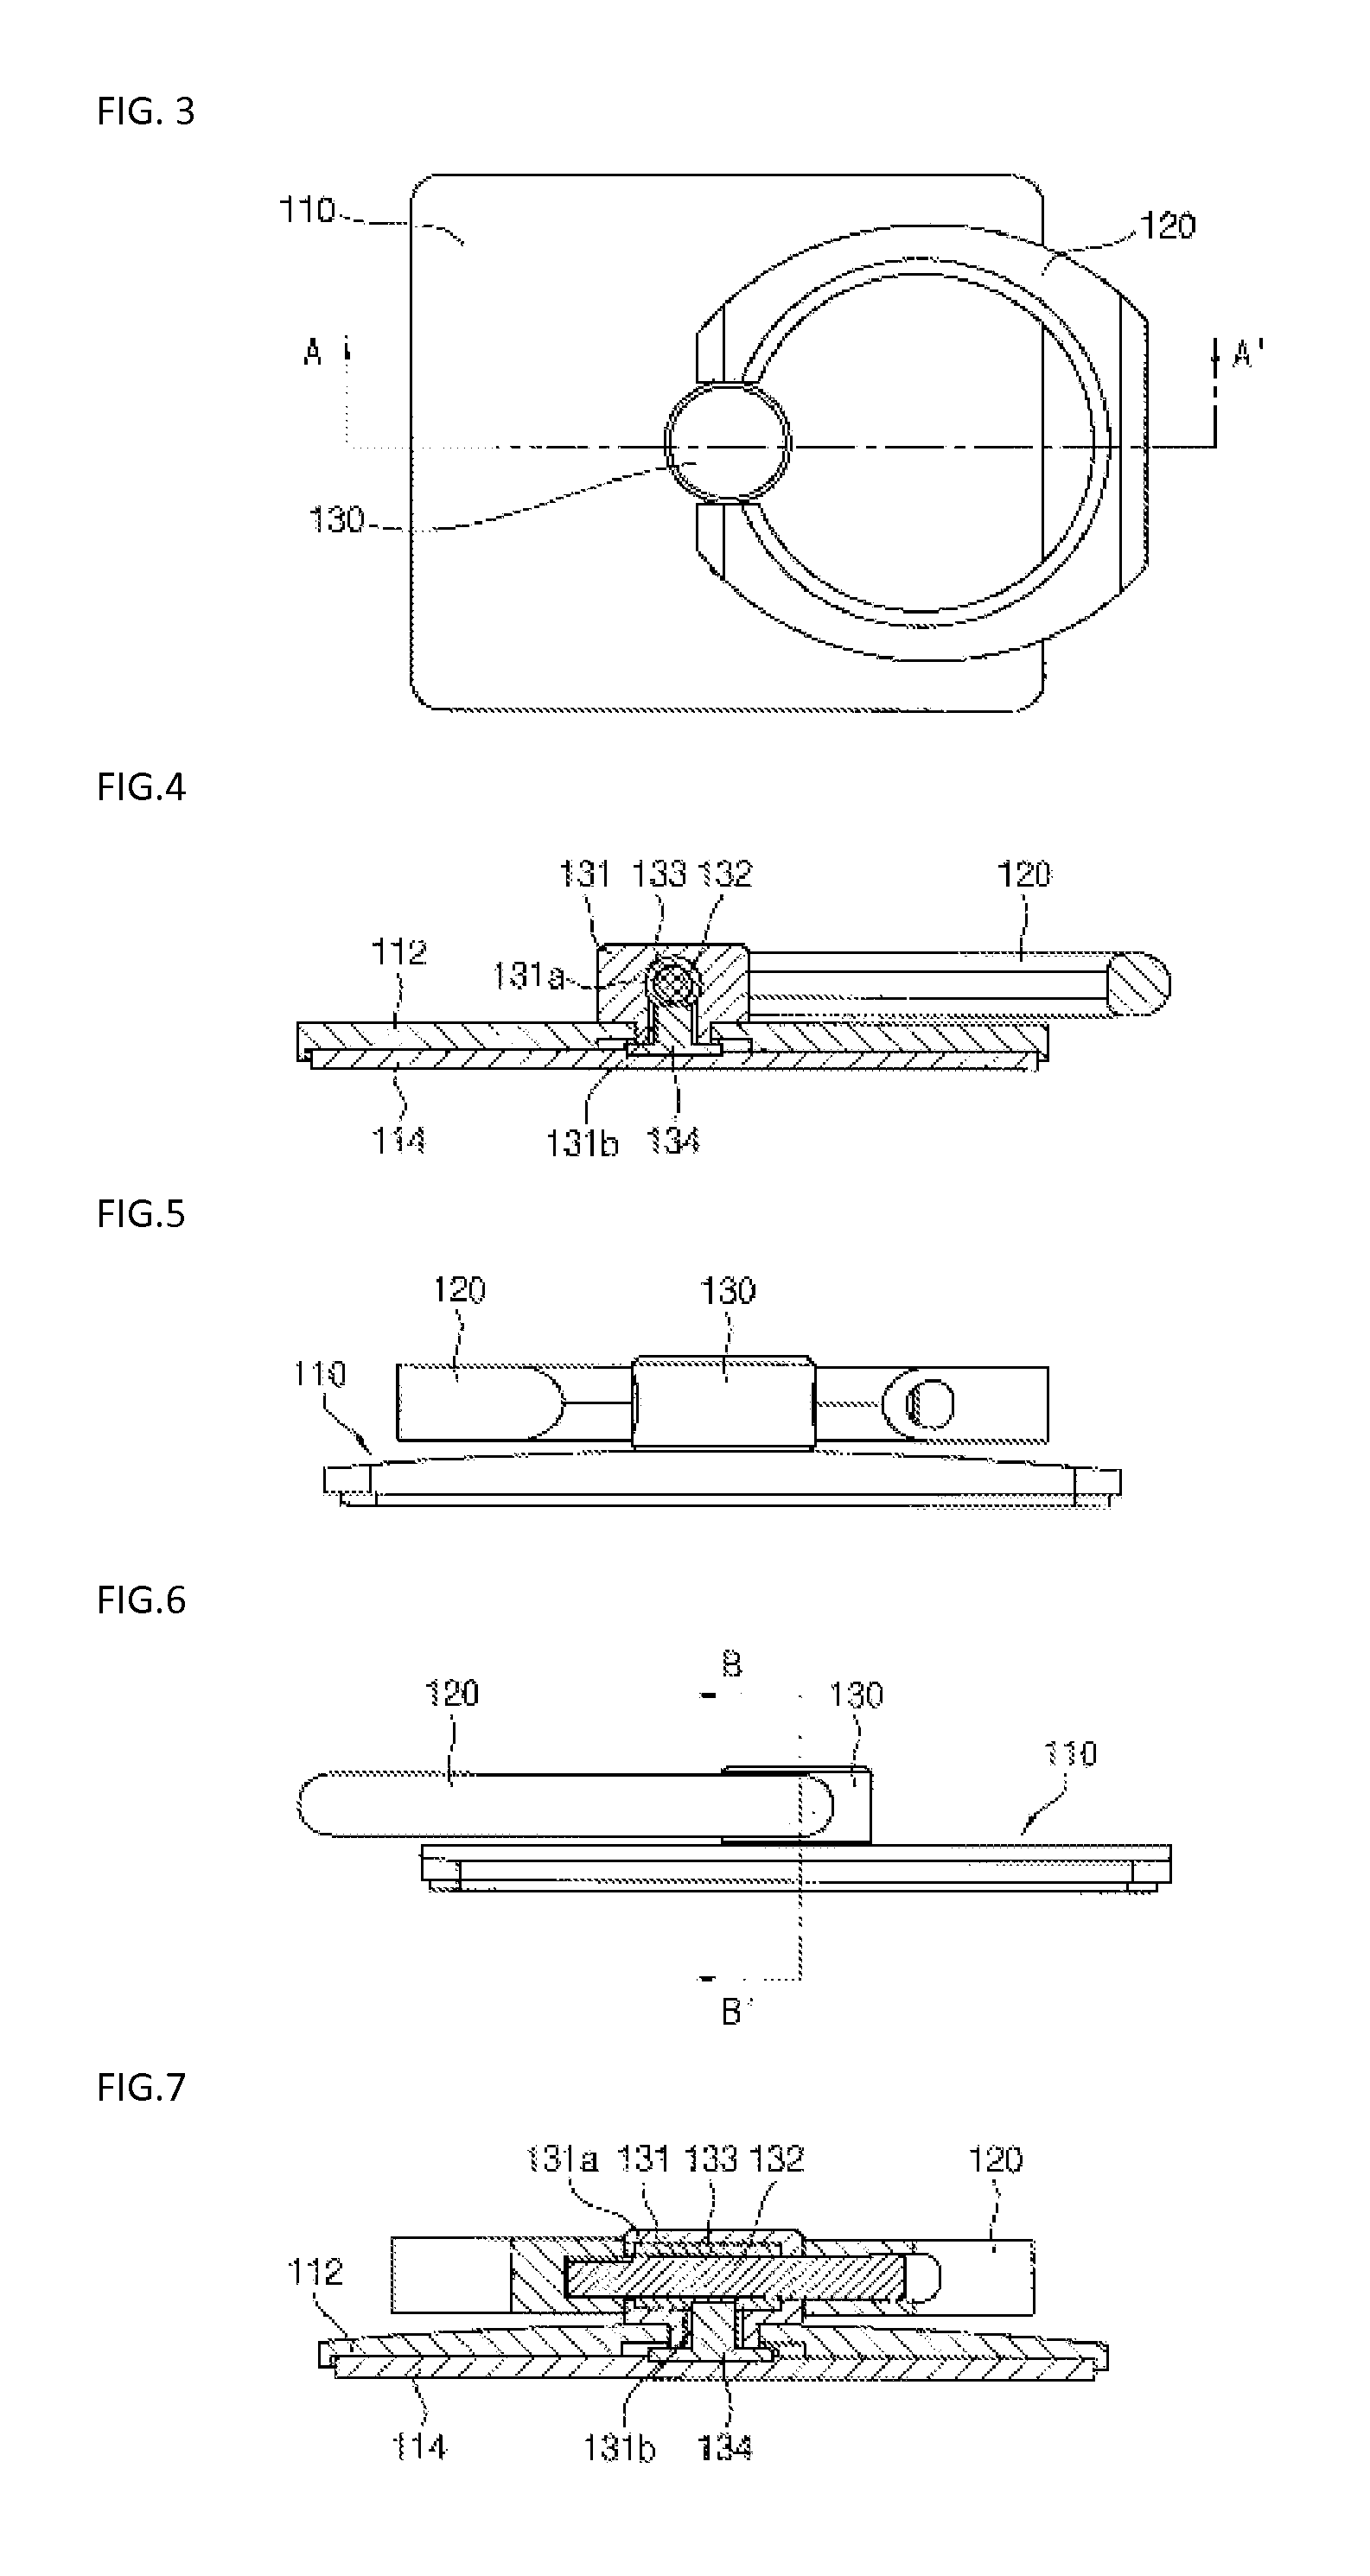 Mobile device accessory and apparatus for mounting the same on an automotive